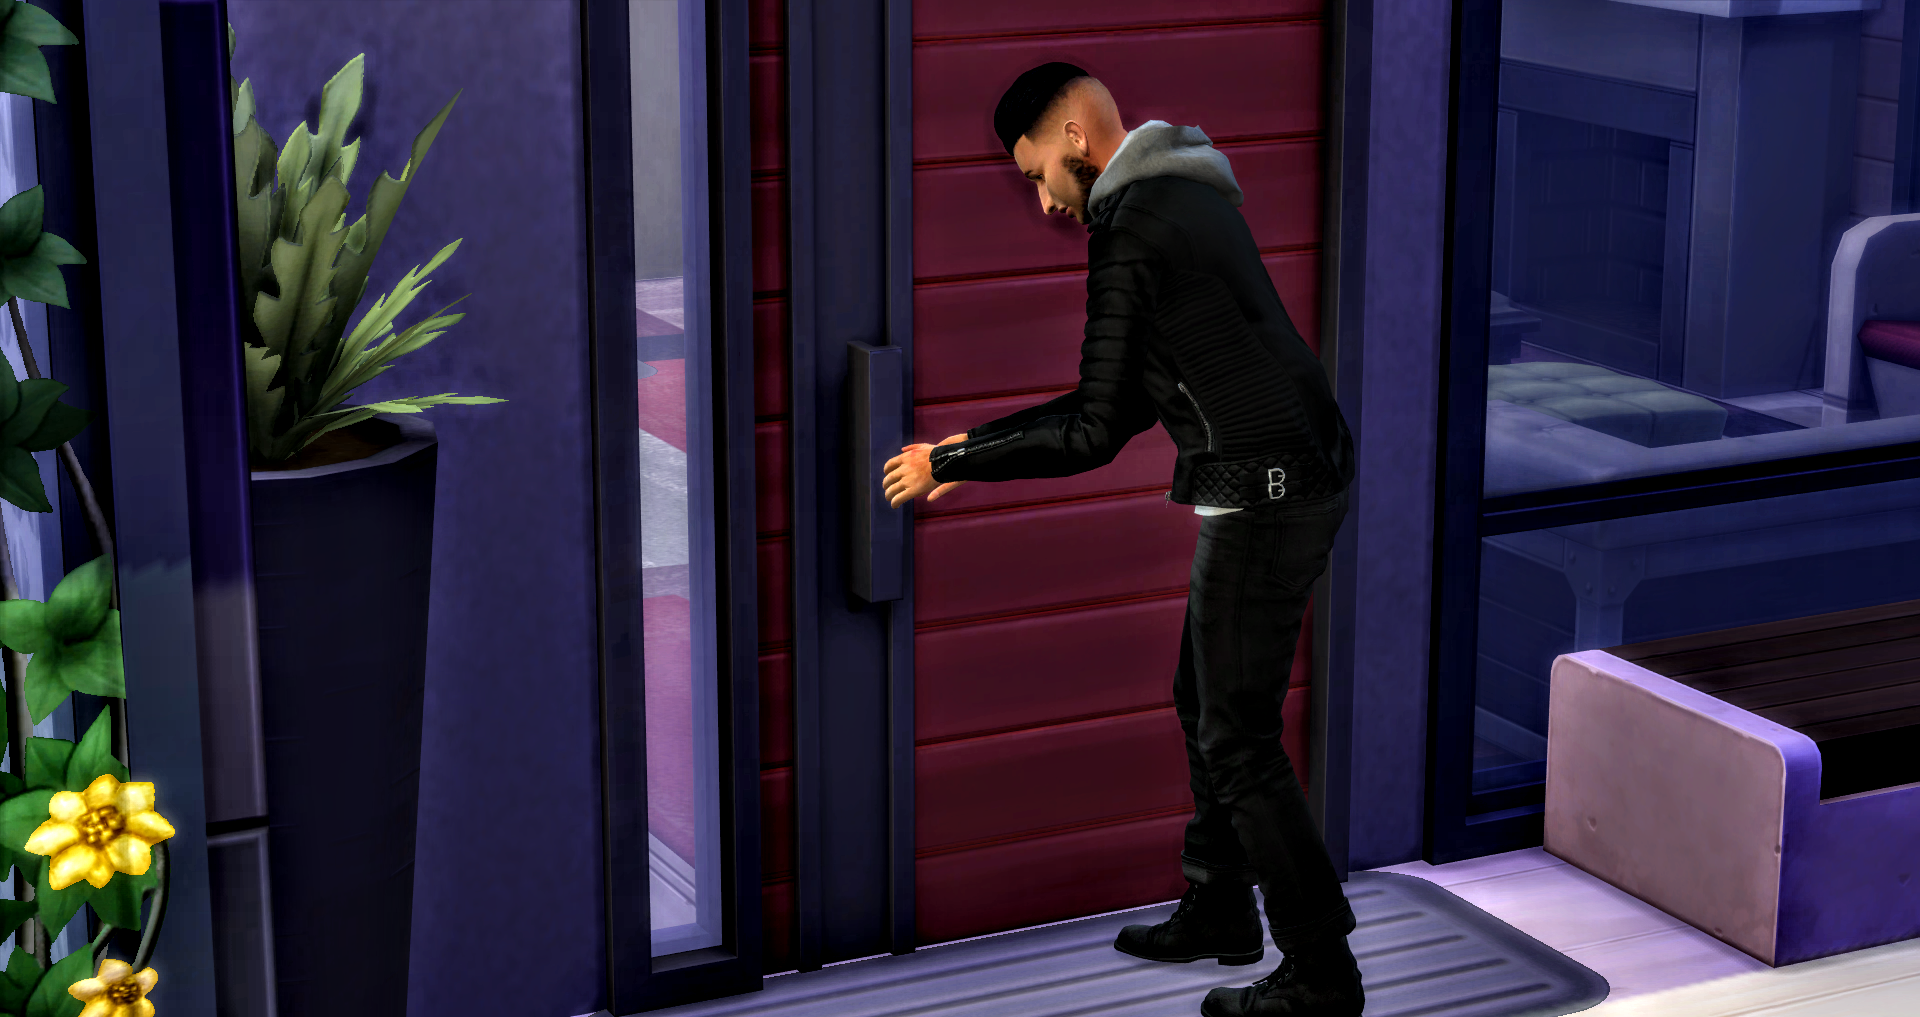 sims 4 life tragedies mod how to call police